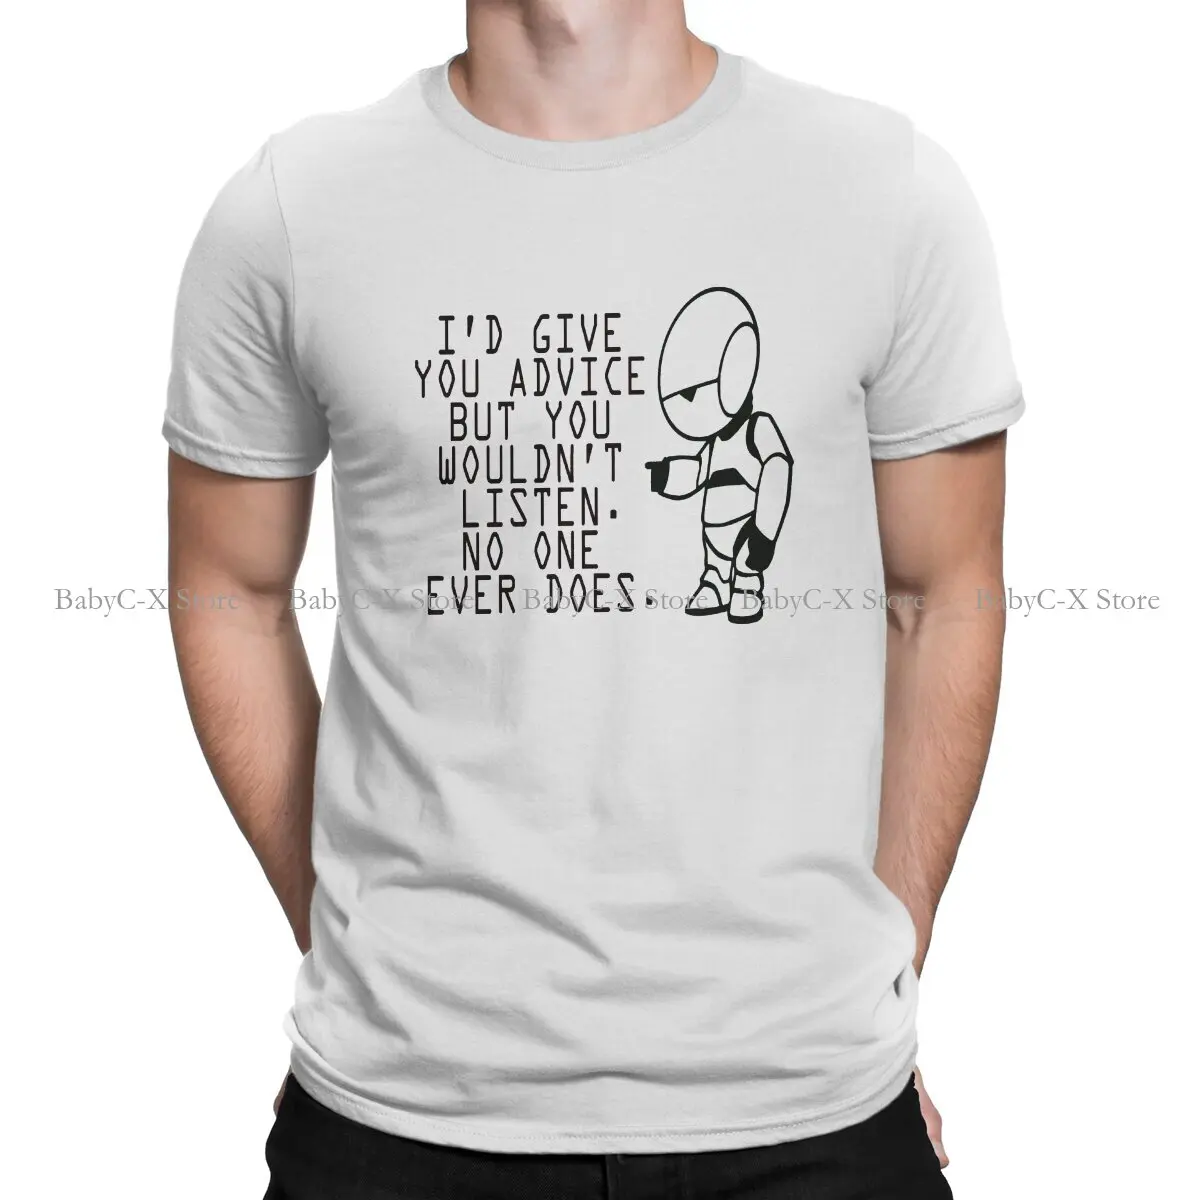 

Marvin Advice O Neck TShirt The Hitchhiker's Guide to the Galaxy Polyester Basic T Shirt Man's Tops Fashion Big Sale